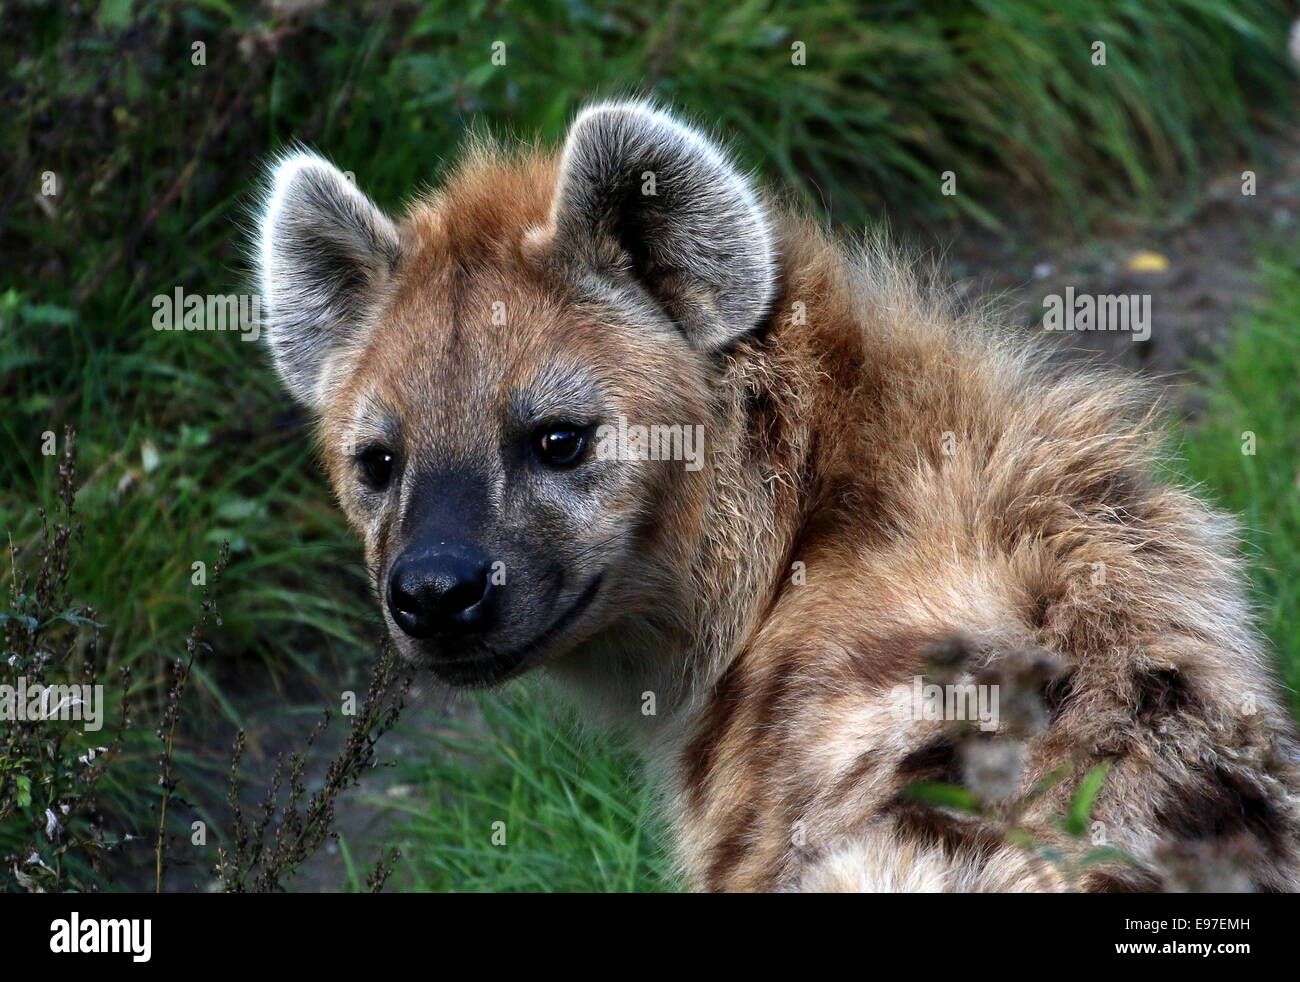 African Spotted or laughing hyena in close-up, looking at the camera Stock Photo